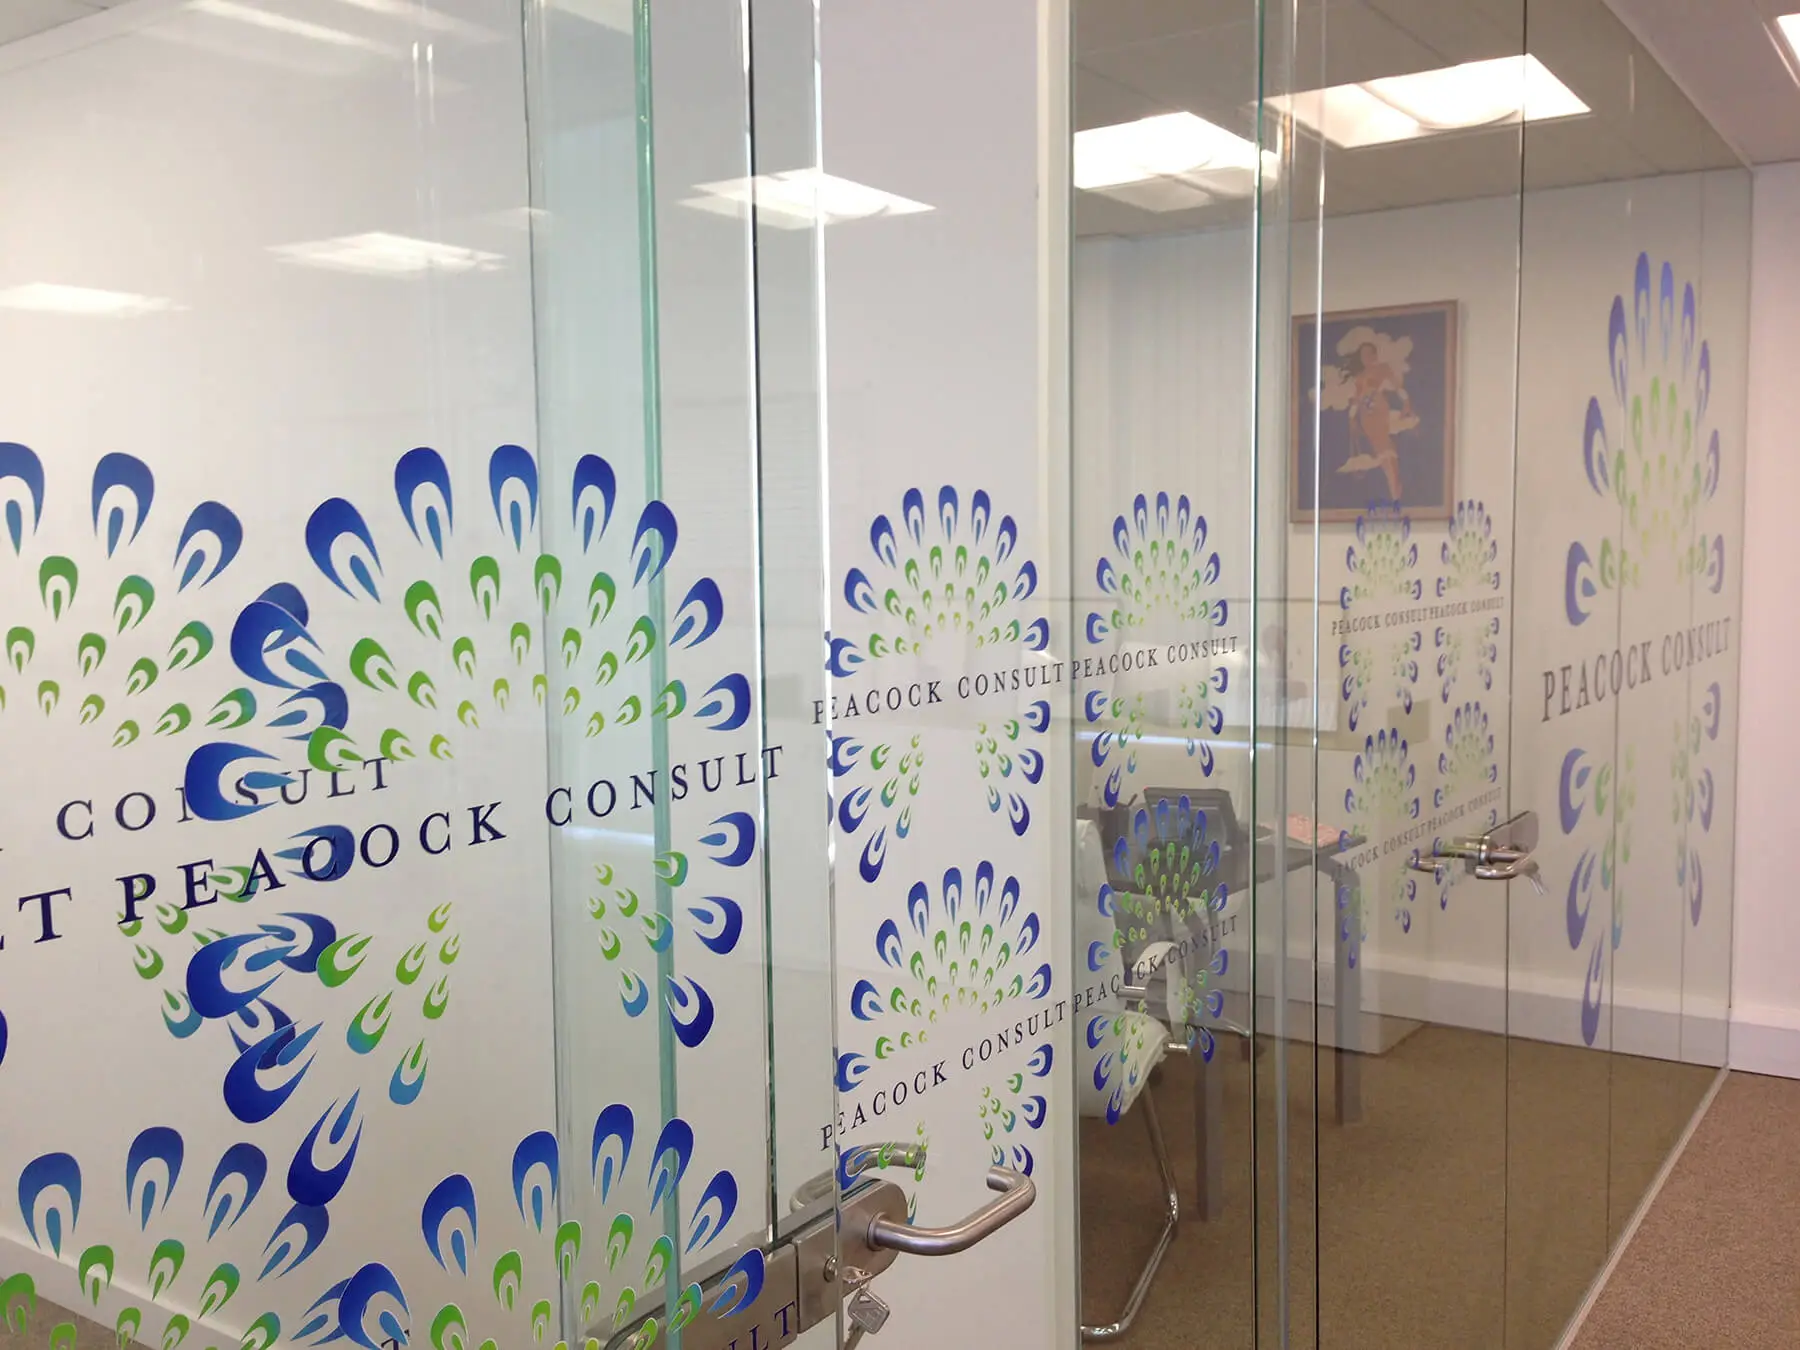 Glass partitions with glass doors and logo cut outs